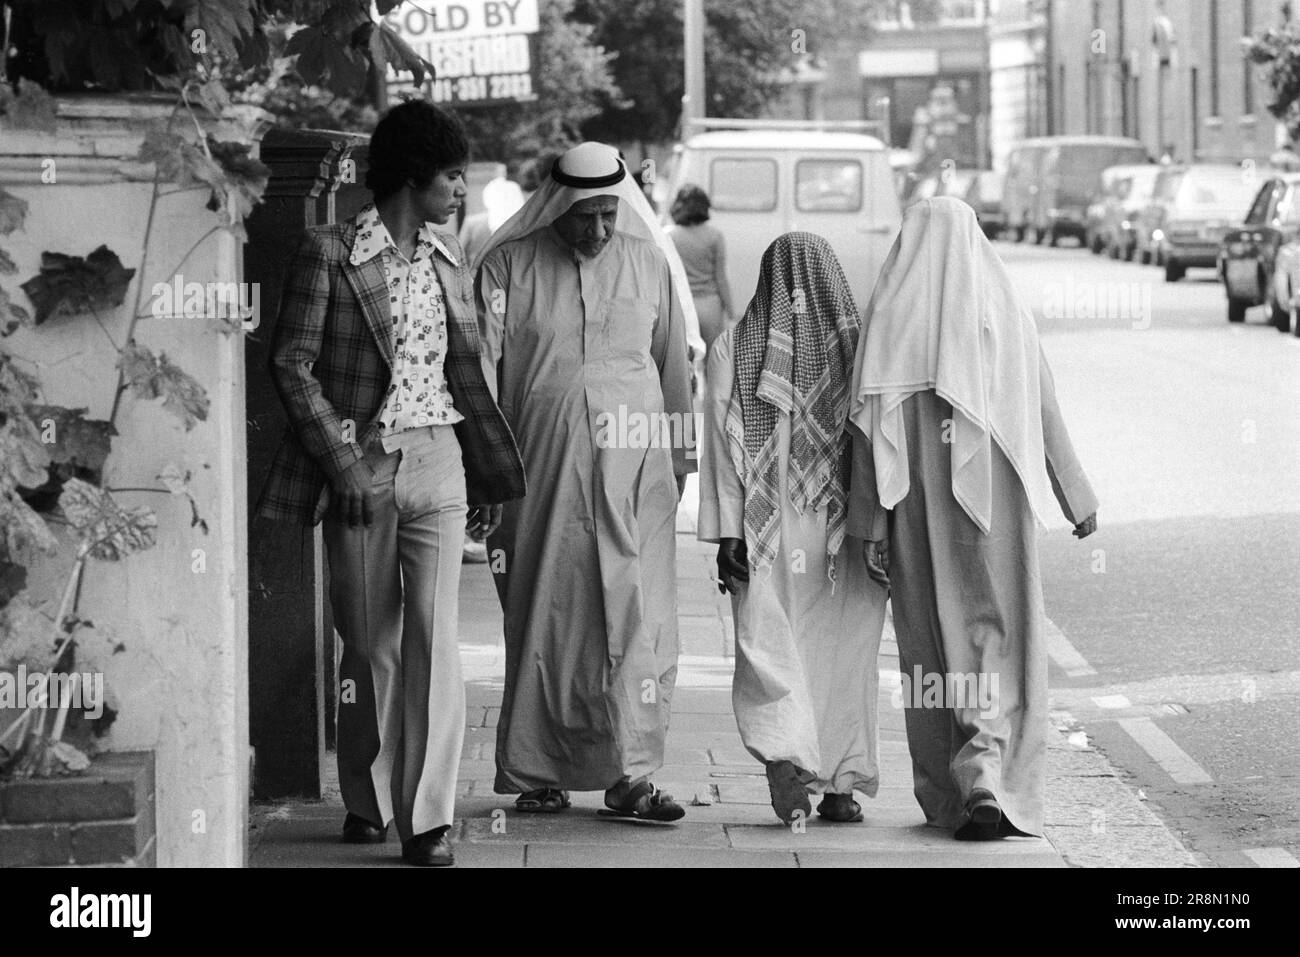 Poor Arab men walking around street of Earls Court London 1970s UK. Middle Eastern people came to Britain for subsidised health care in Harley Street clinics. They mainly stayed in the Earls Court area. Four men, a younger man in western dress and the other three men wearing the traditional white robes called a thoub, thobe, dishdasha or kandora and traditional Arab headdress called the kaffiyeh or ghutra. Earls Court, London, England circa 1977 70s UK HOMER SYKES Stock Photo